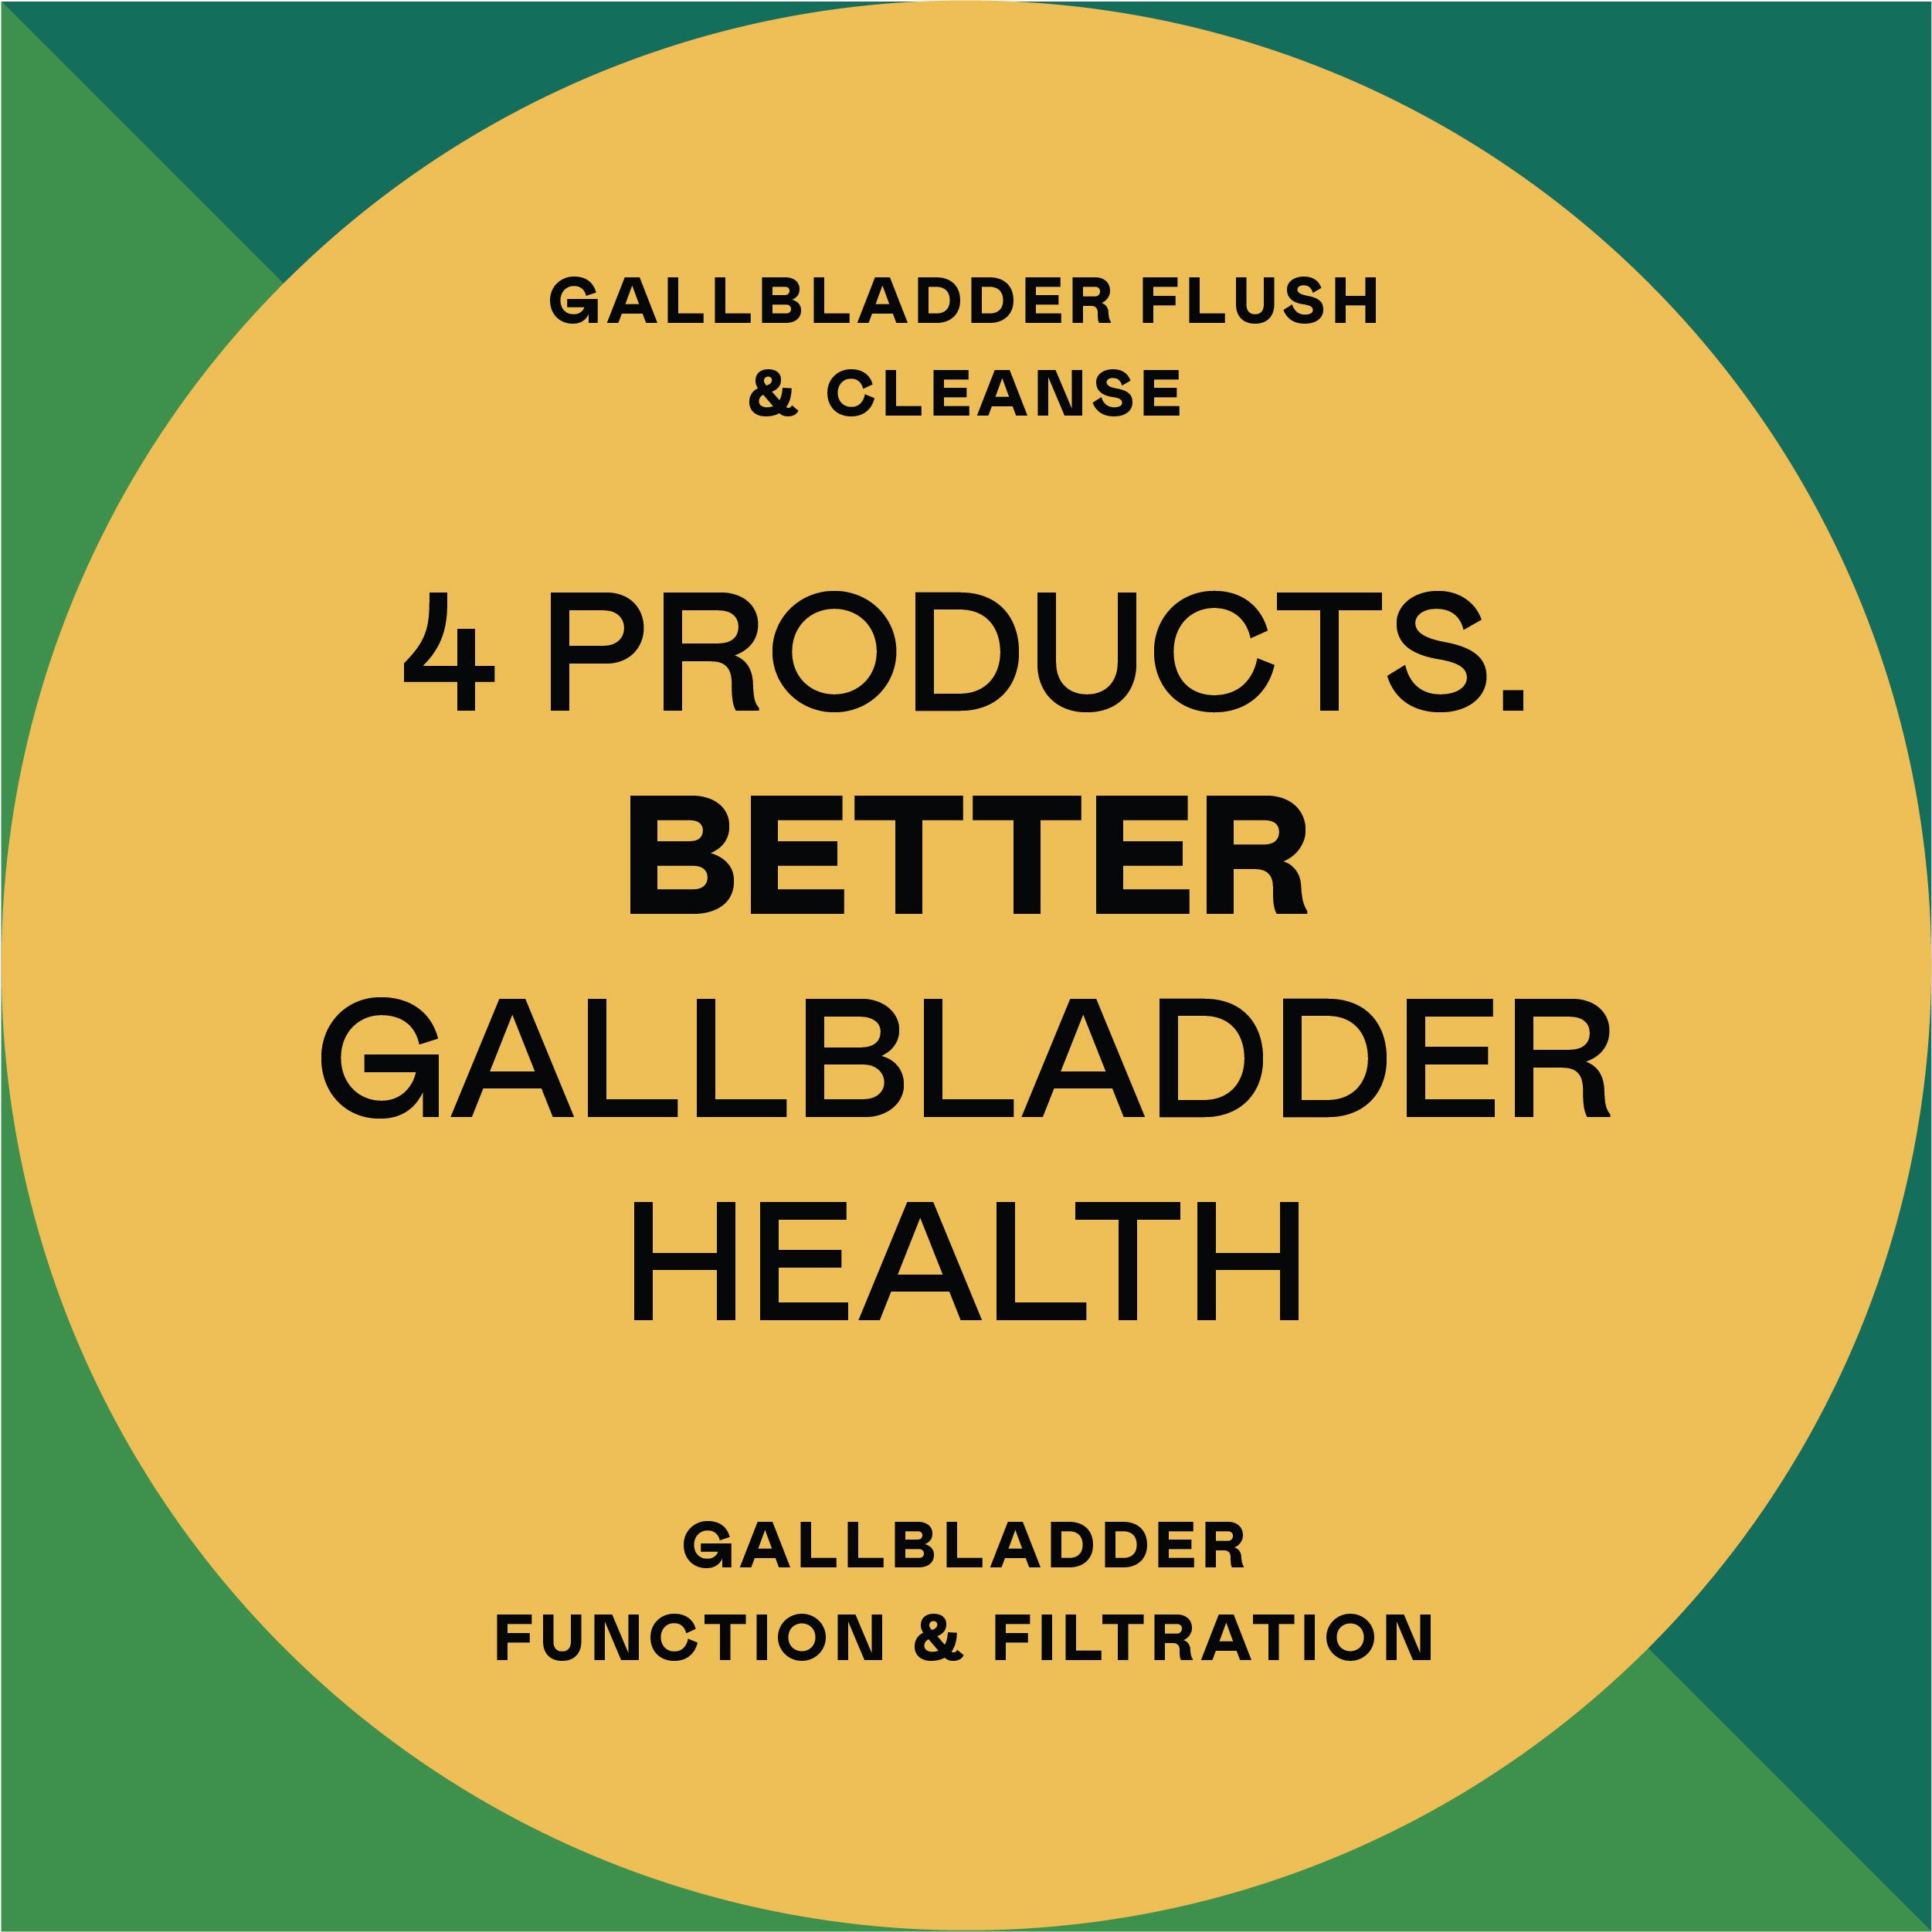 The Gallbladder Complete Bundle is a supplement that helps cleanse bile from your Gallbladder and Liver. 